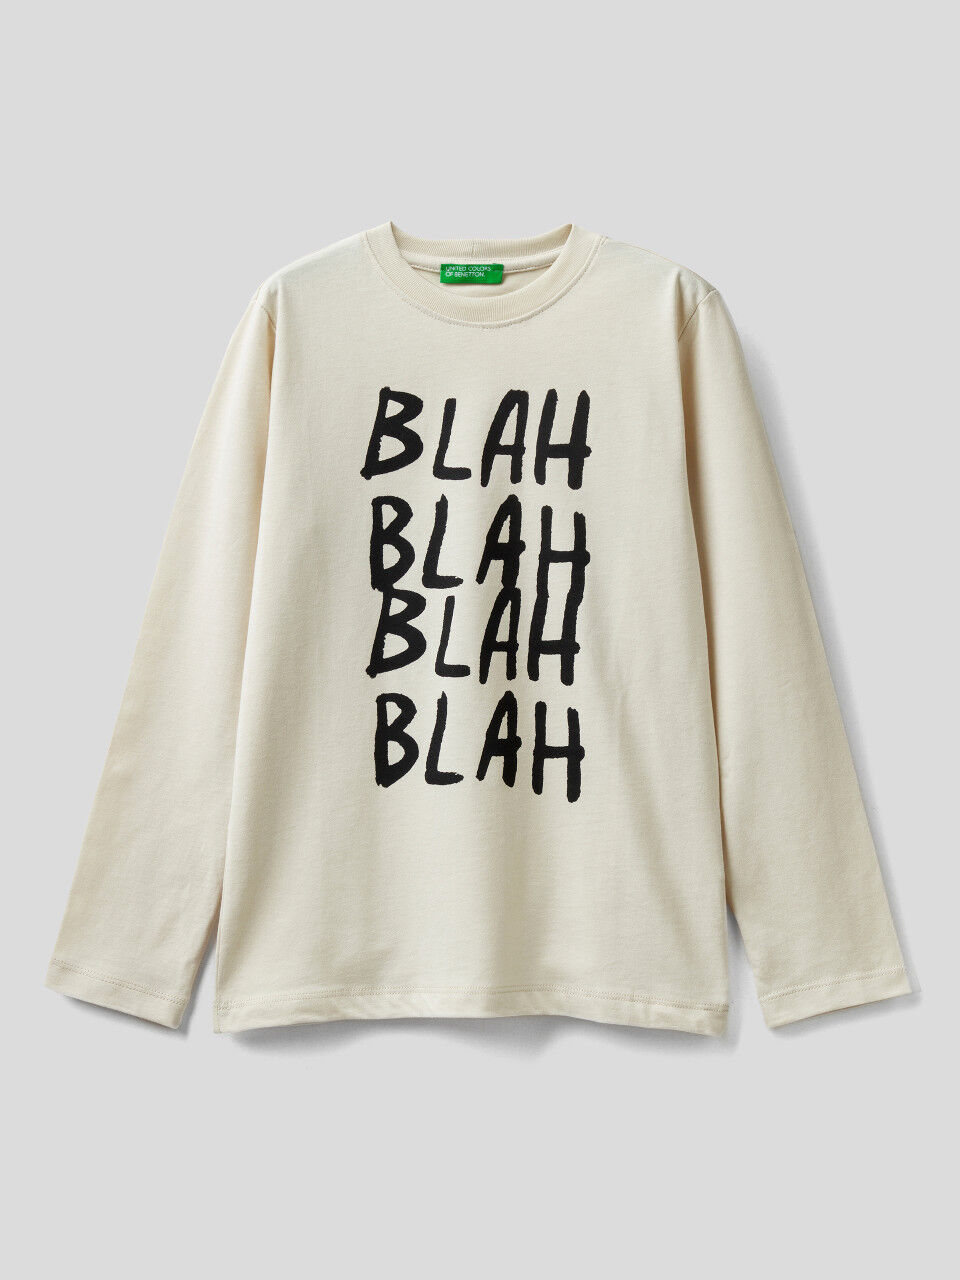 Long sleeve t-shirt in warm cotton